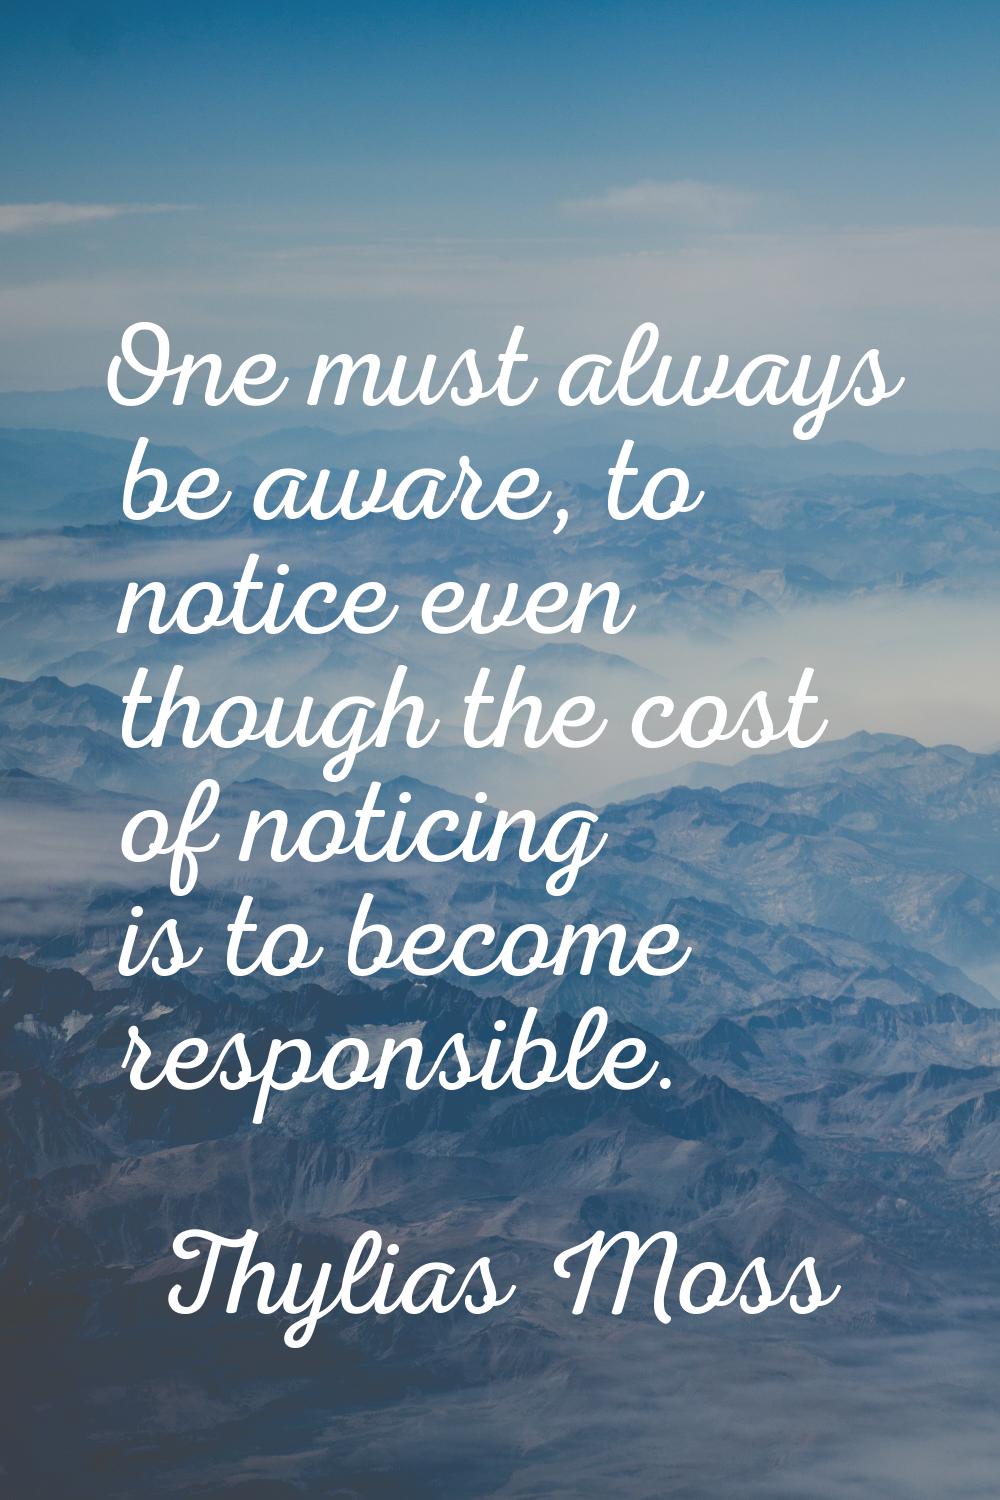 One must always be aware, to notice even though the cost of noticing is to become responsible.